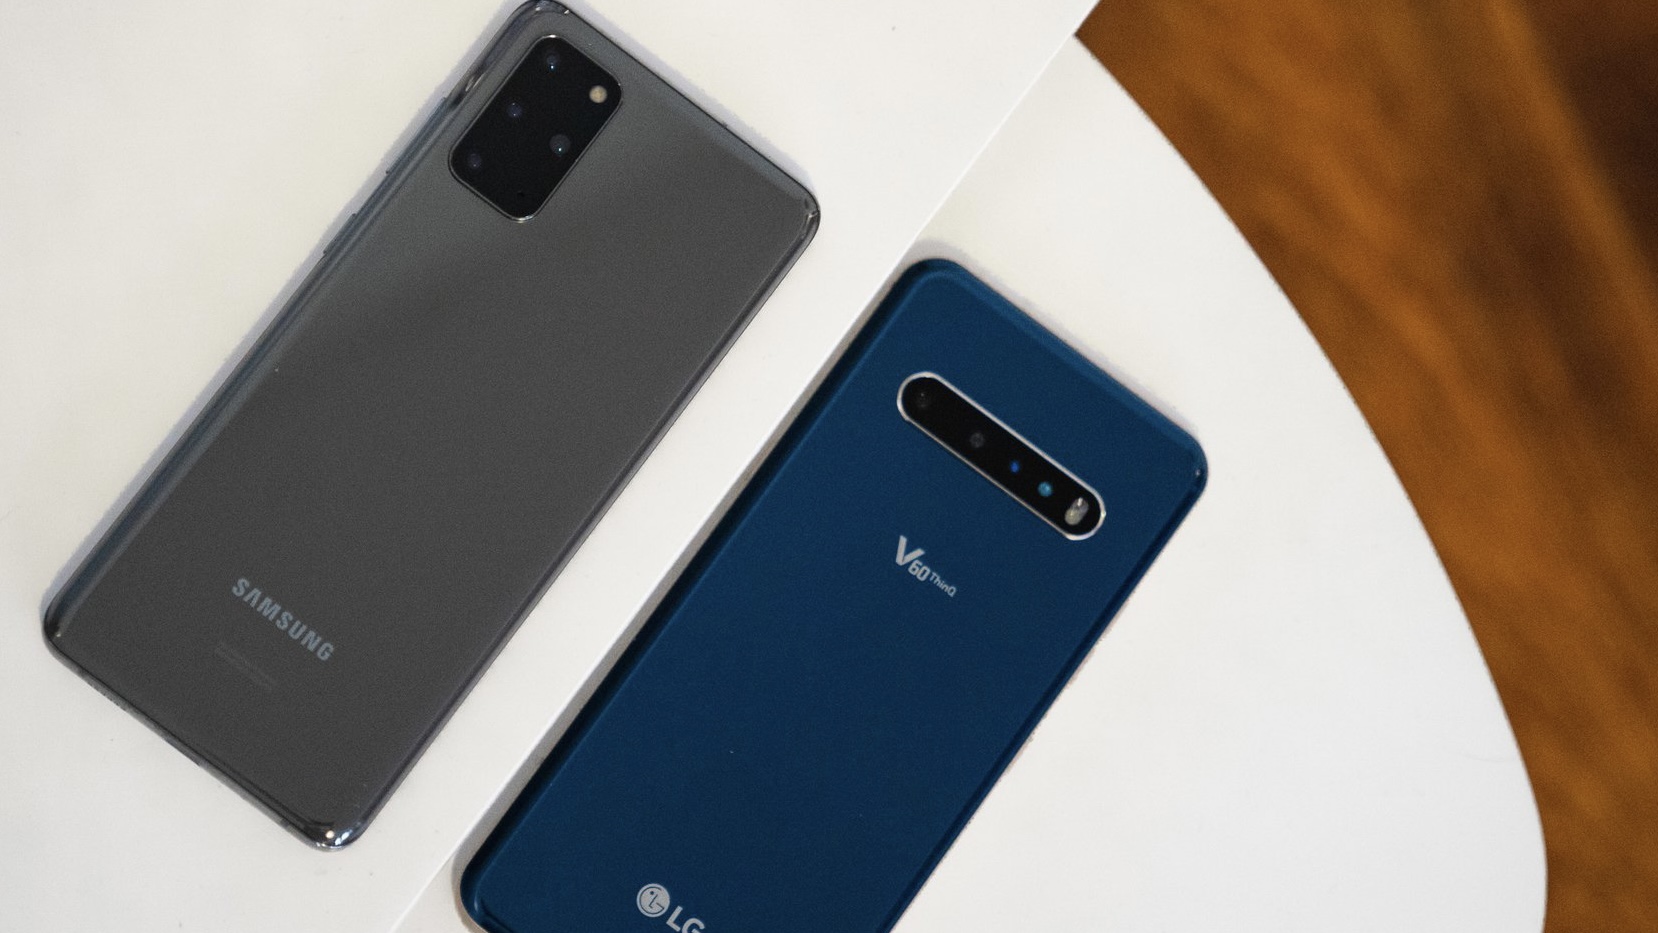 Samsung Galaxy S20 + and LG V60 together